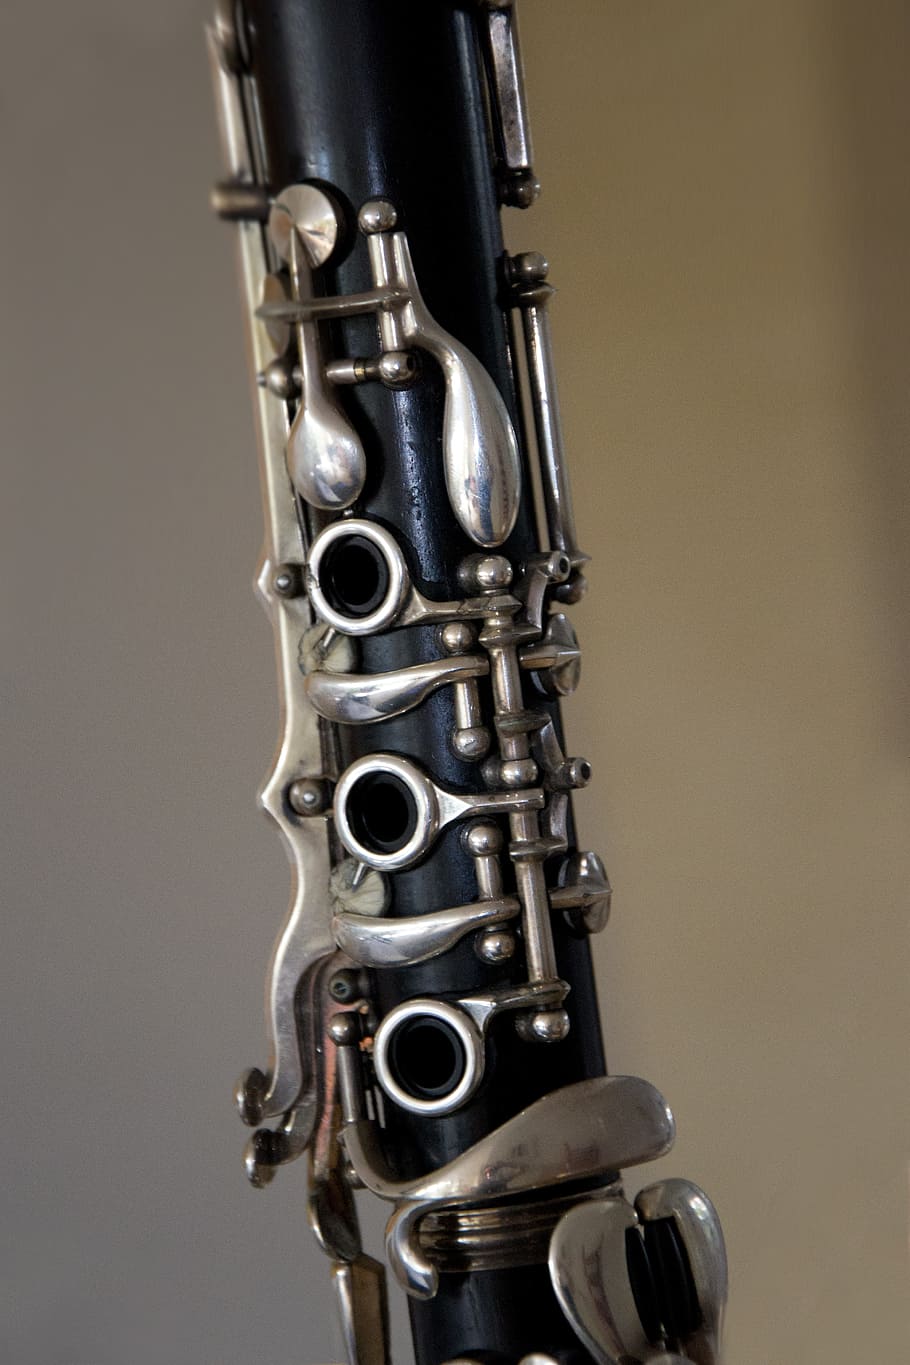 Hd Wallpaper Close Up Of Black And Silver Clarinet Musical Instrument Woodwind Wallpaper Flare